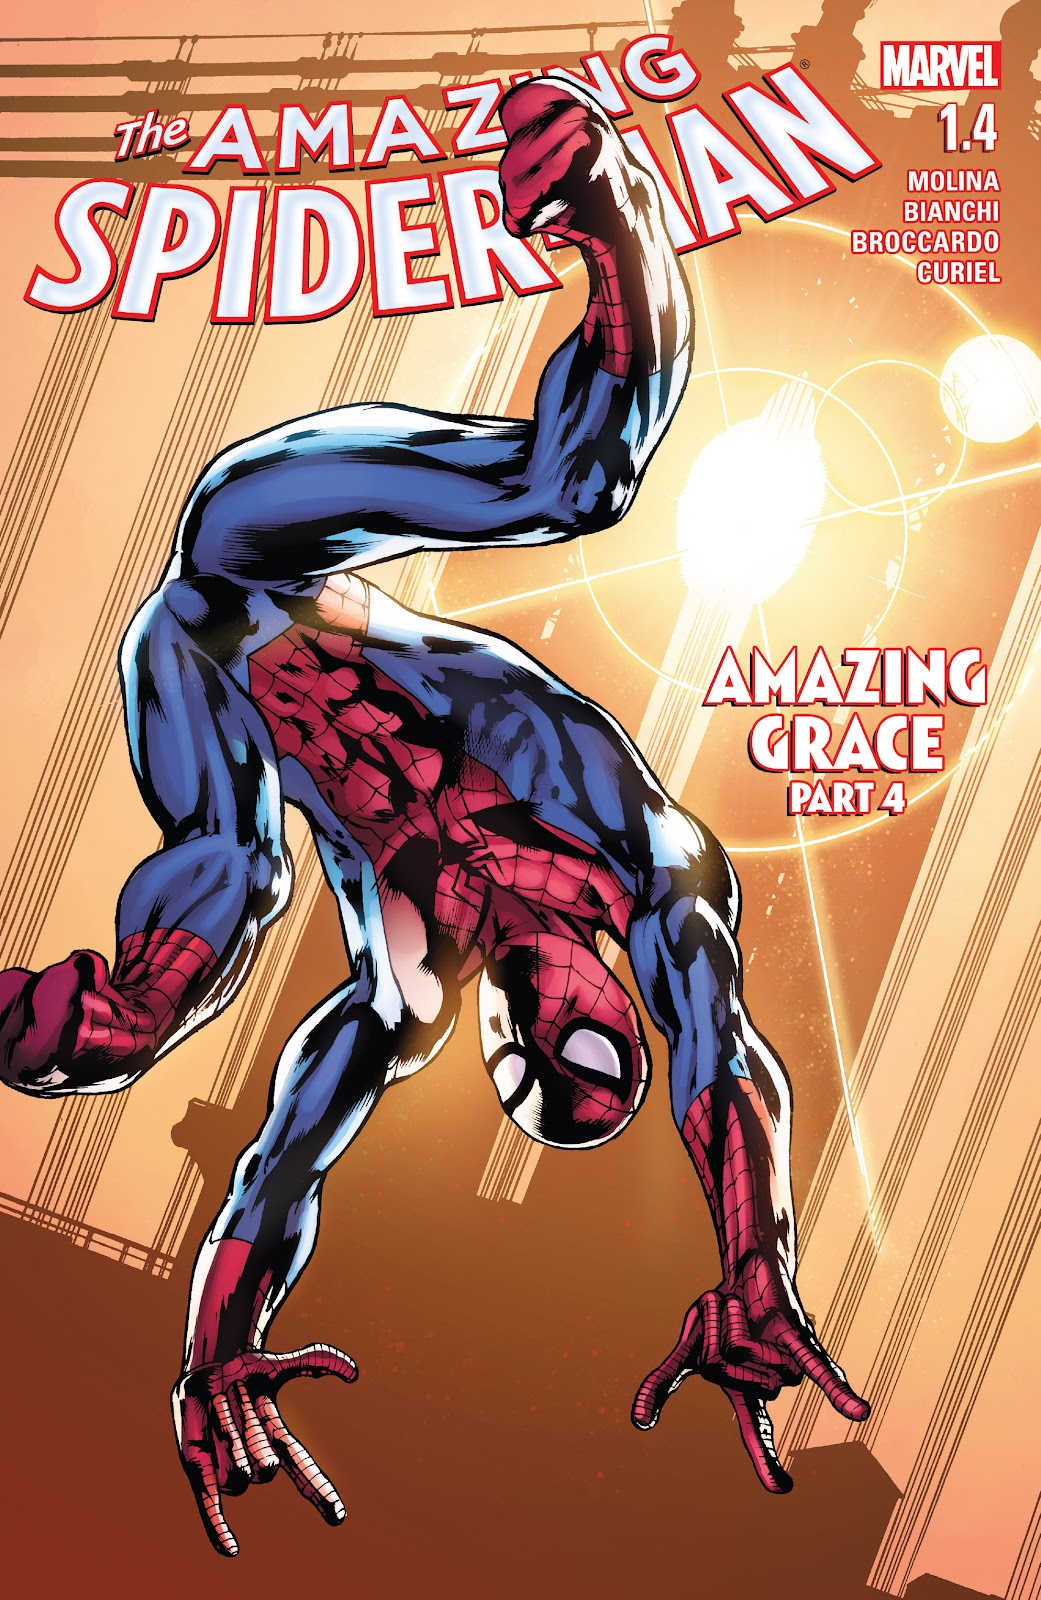 The Amazing Spider-Man (2015) issue 1.4 - Page 1